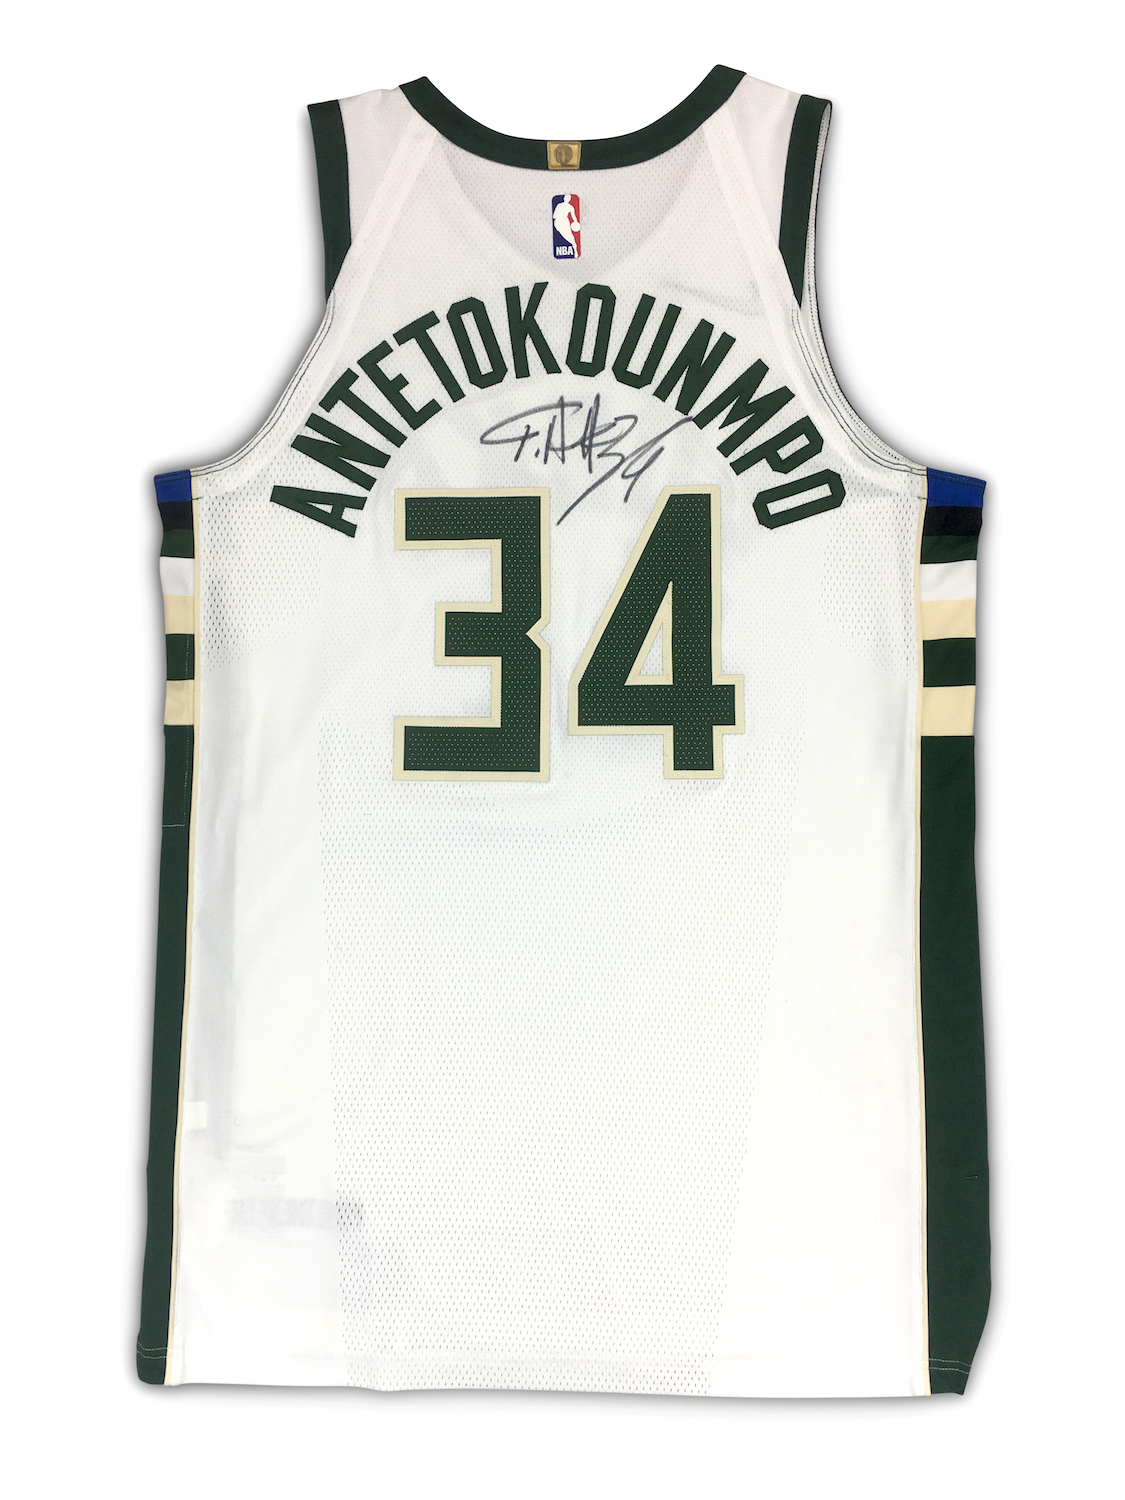 Sold at Auction: Giannis Antetokounmpo Signed Jersey